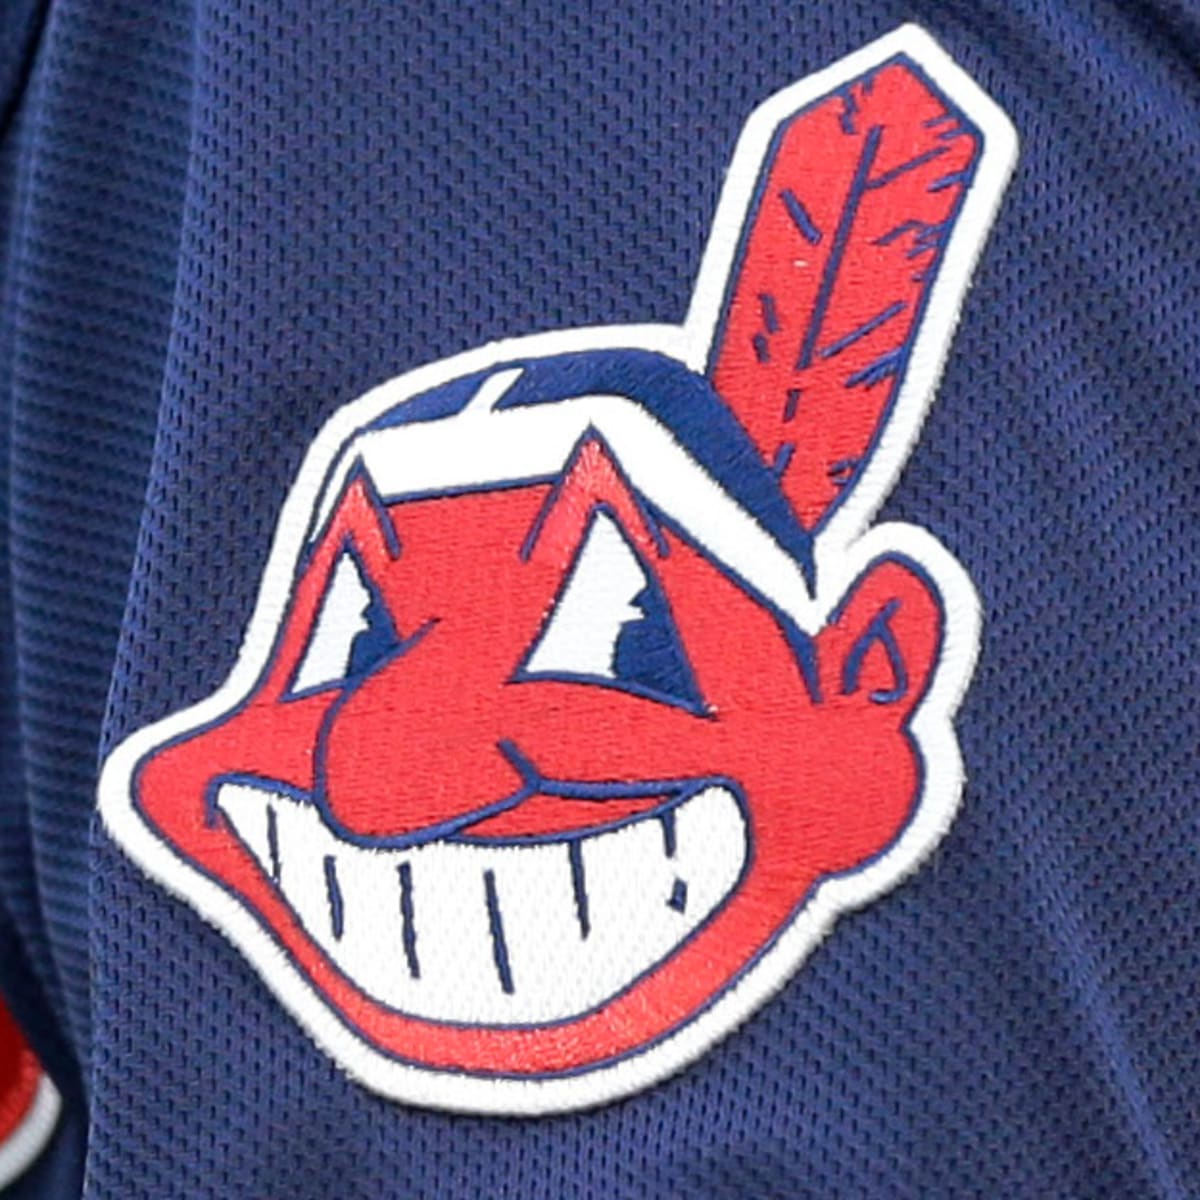 Indians to stop using Chief Wahoo logo